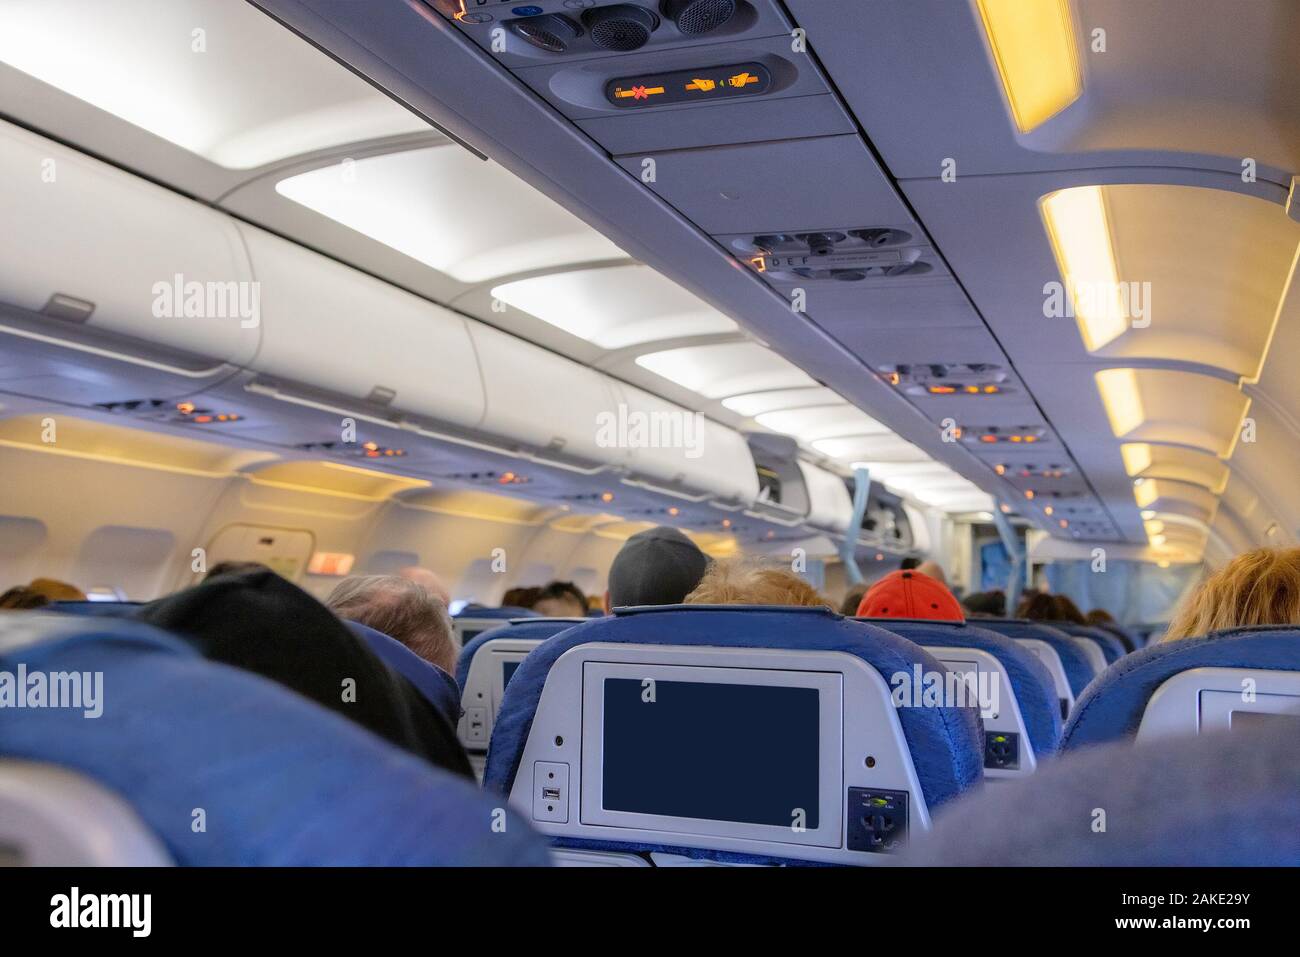 Inside of an airplane cabin with passengers on flight waiting for takeoff. Stock Photo